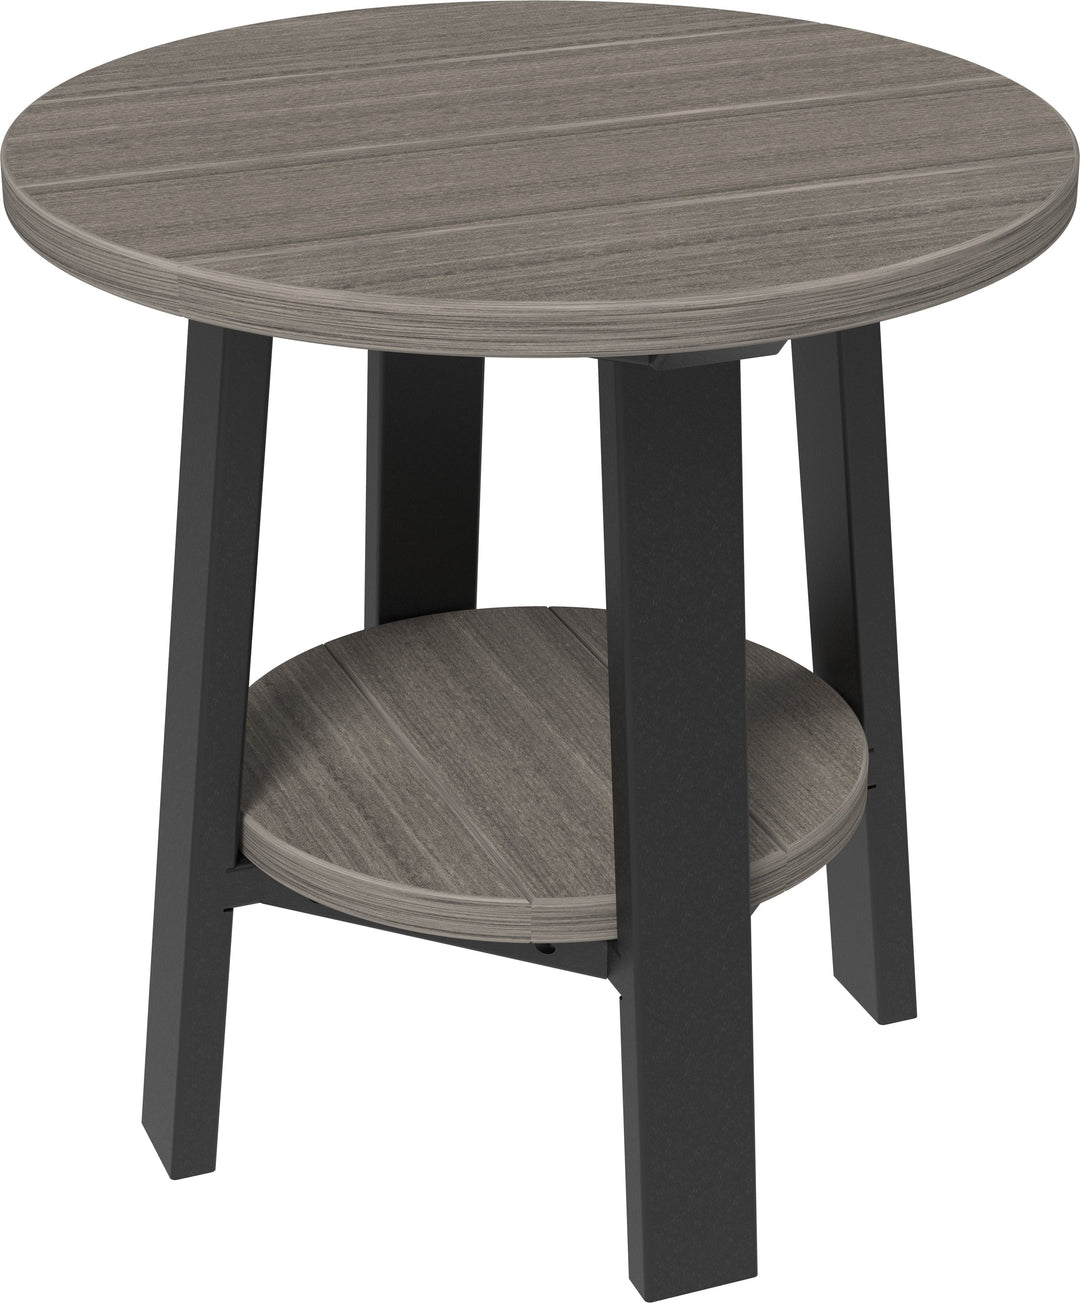 Luxcraft Deluxe End Tables